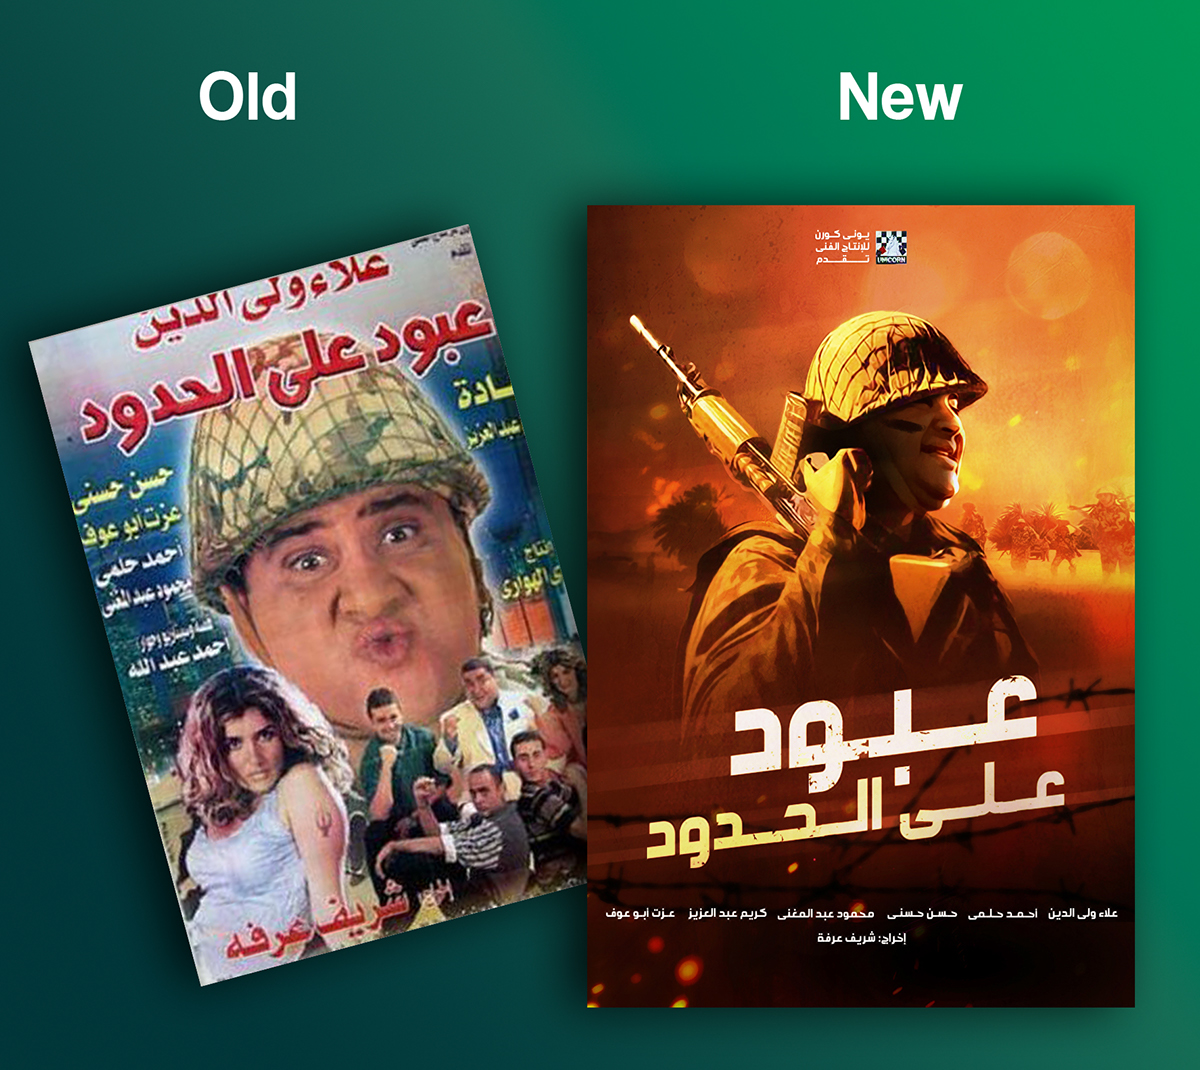 arabic Movies redesign manipulation vintage old posters color graphic